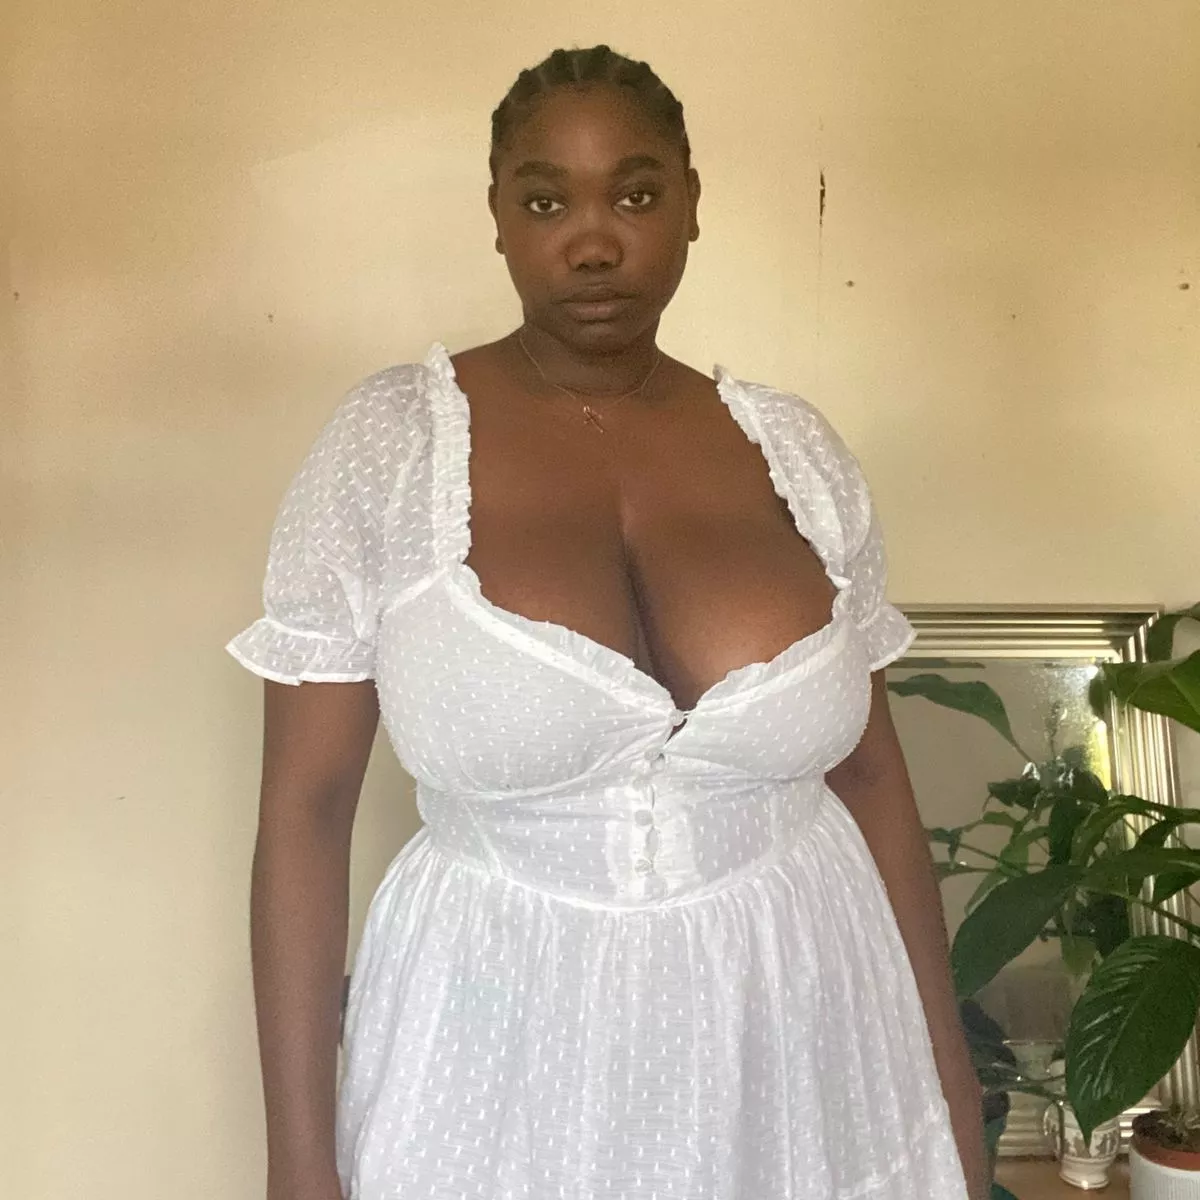 courtney eframson recommends big tits old women pic